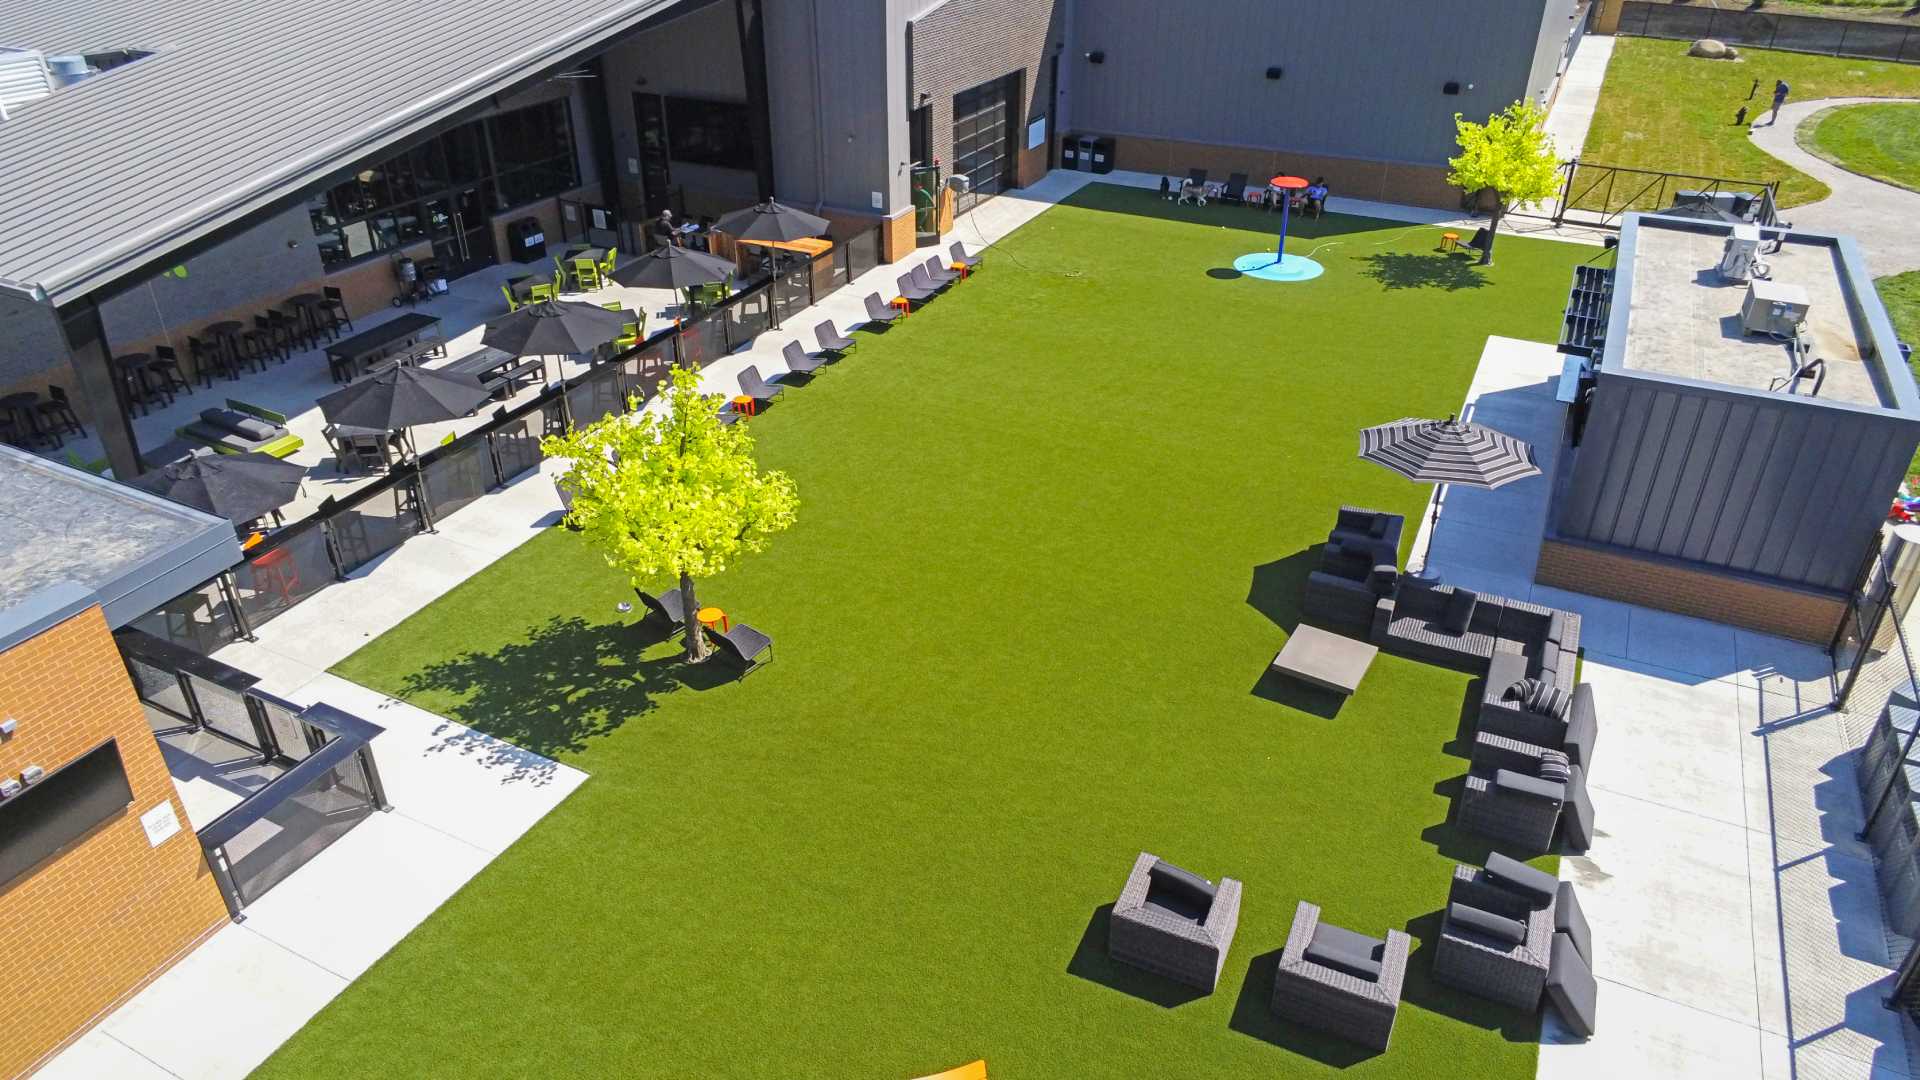 Drone shot of commercial artificial grass lawn installed by SYNLawn